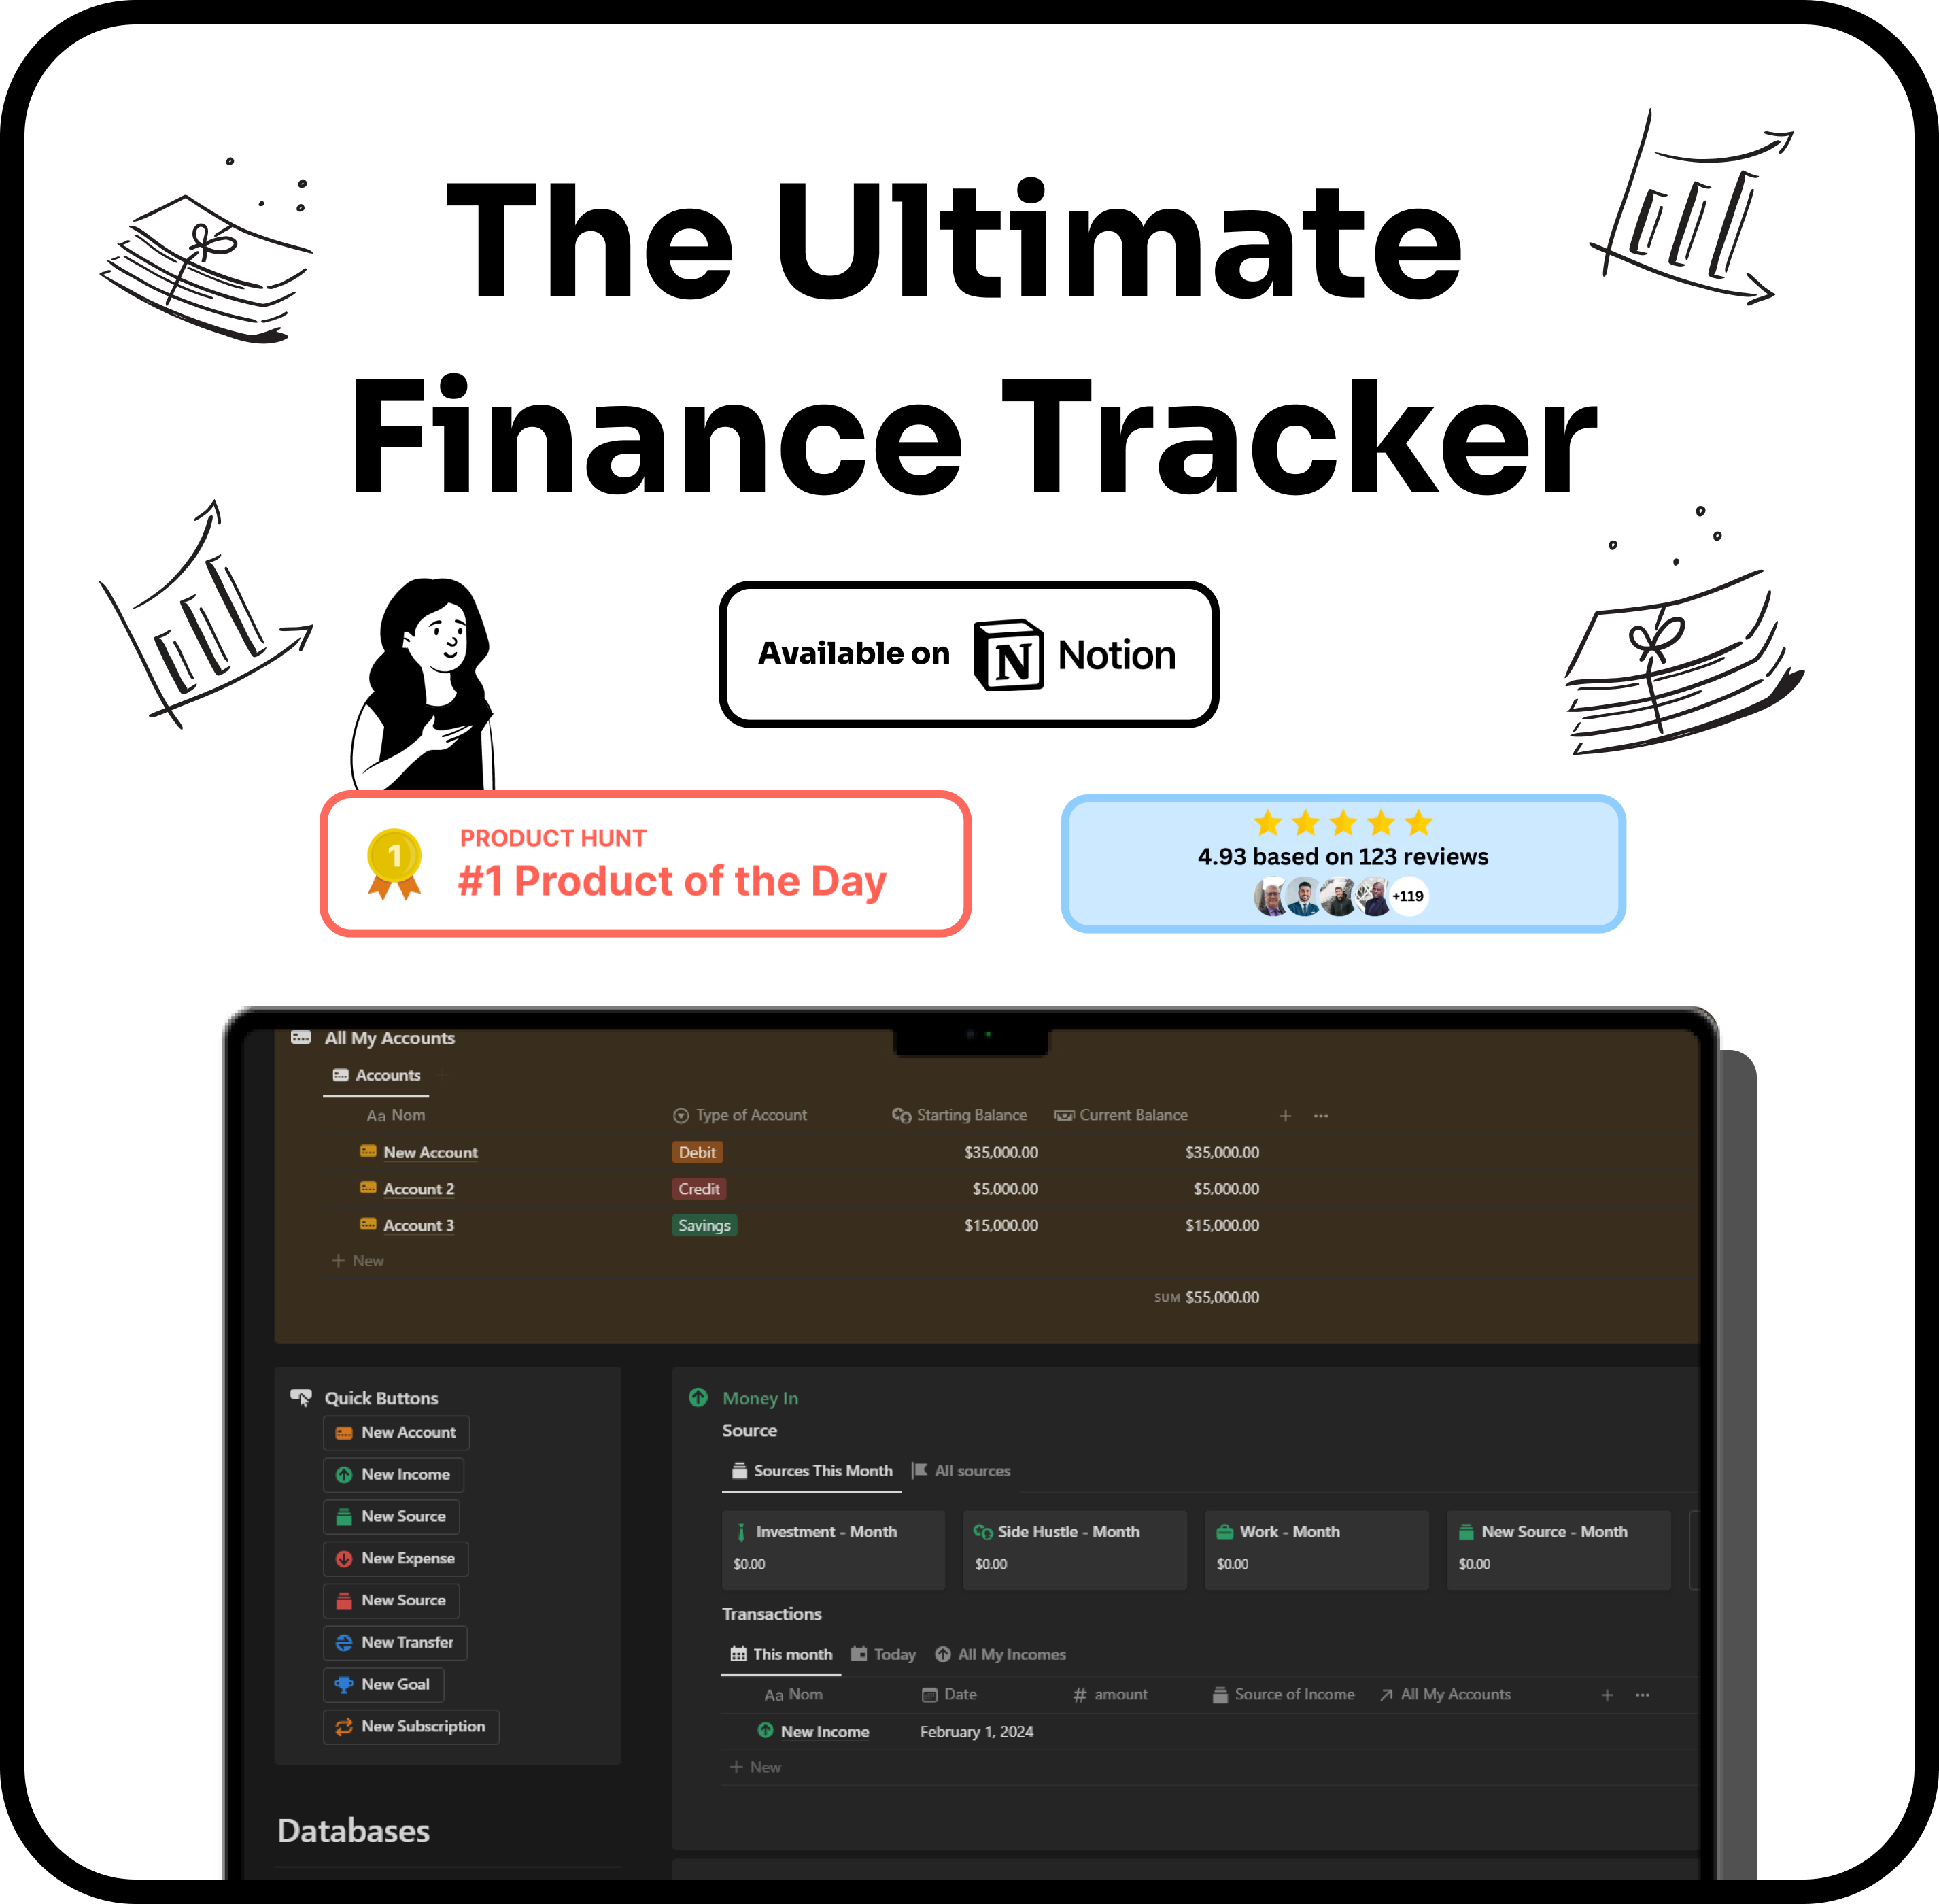 The Ultimate Finance Tracker 2.0